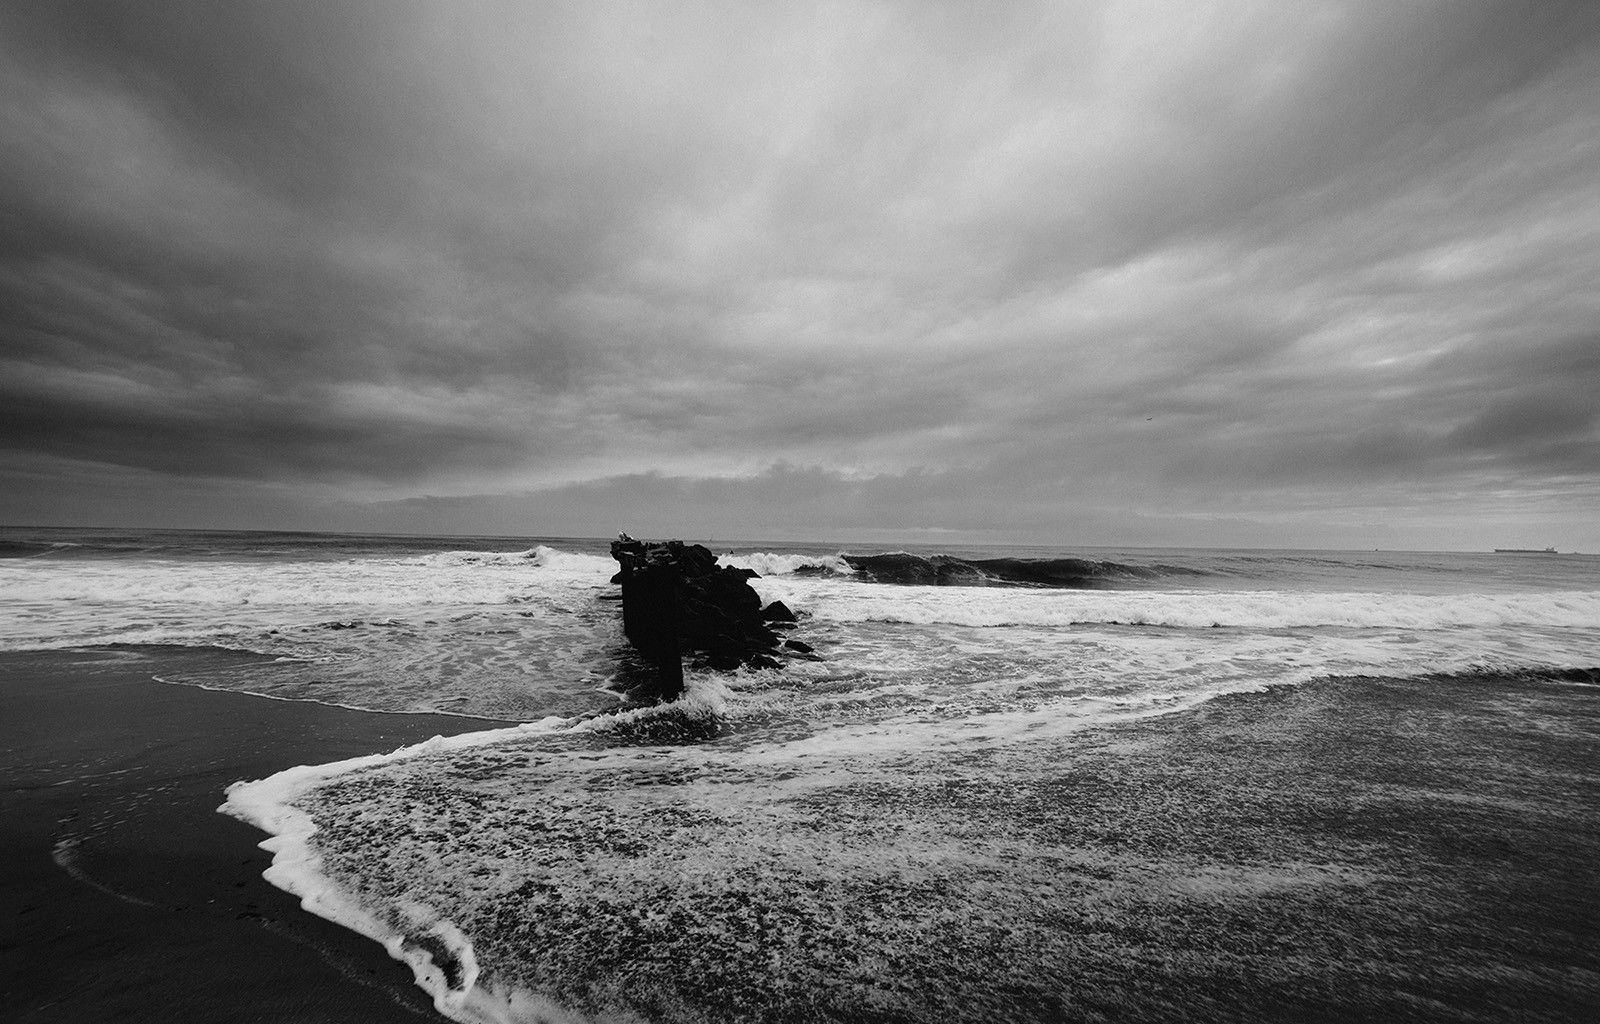 Sea, Black, And, White, Weather, Ocean, Monochrome Wallpapers, Black And Wh...